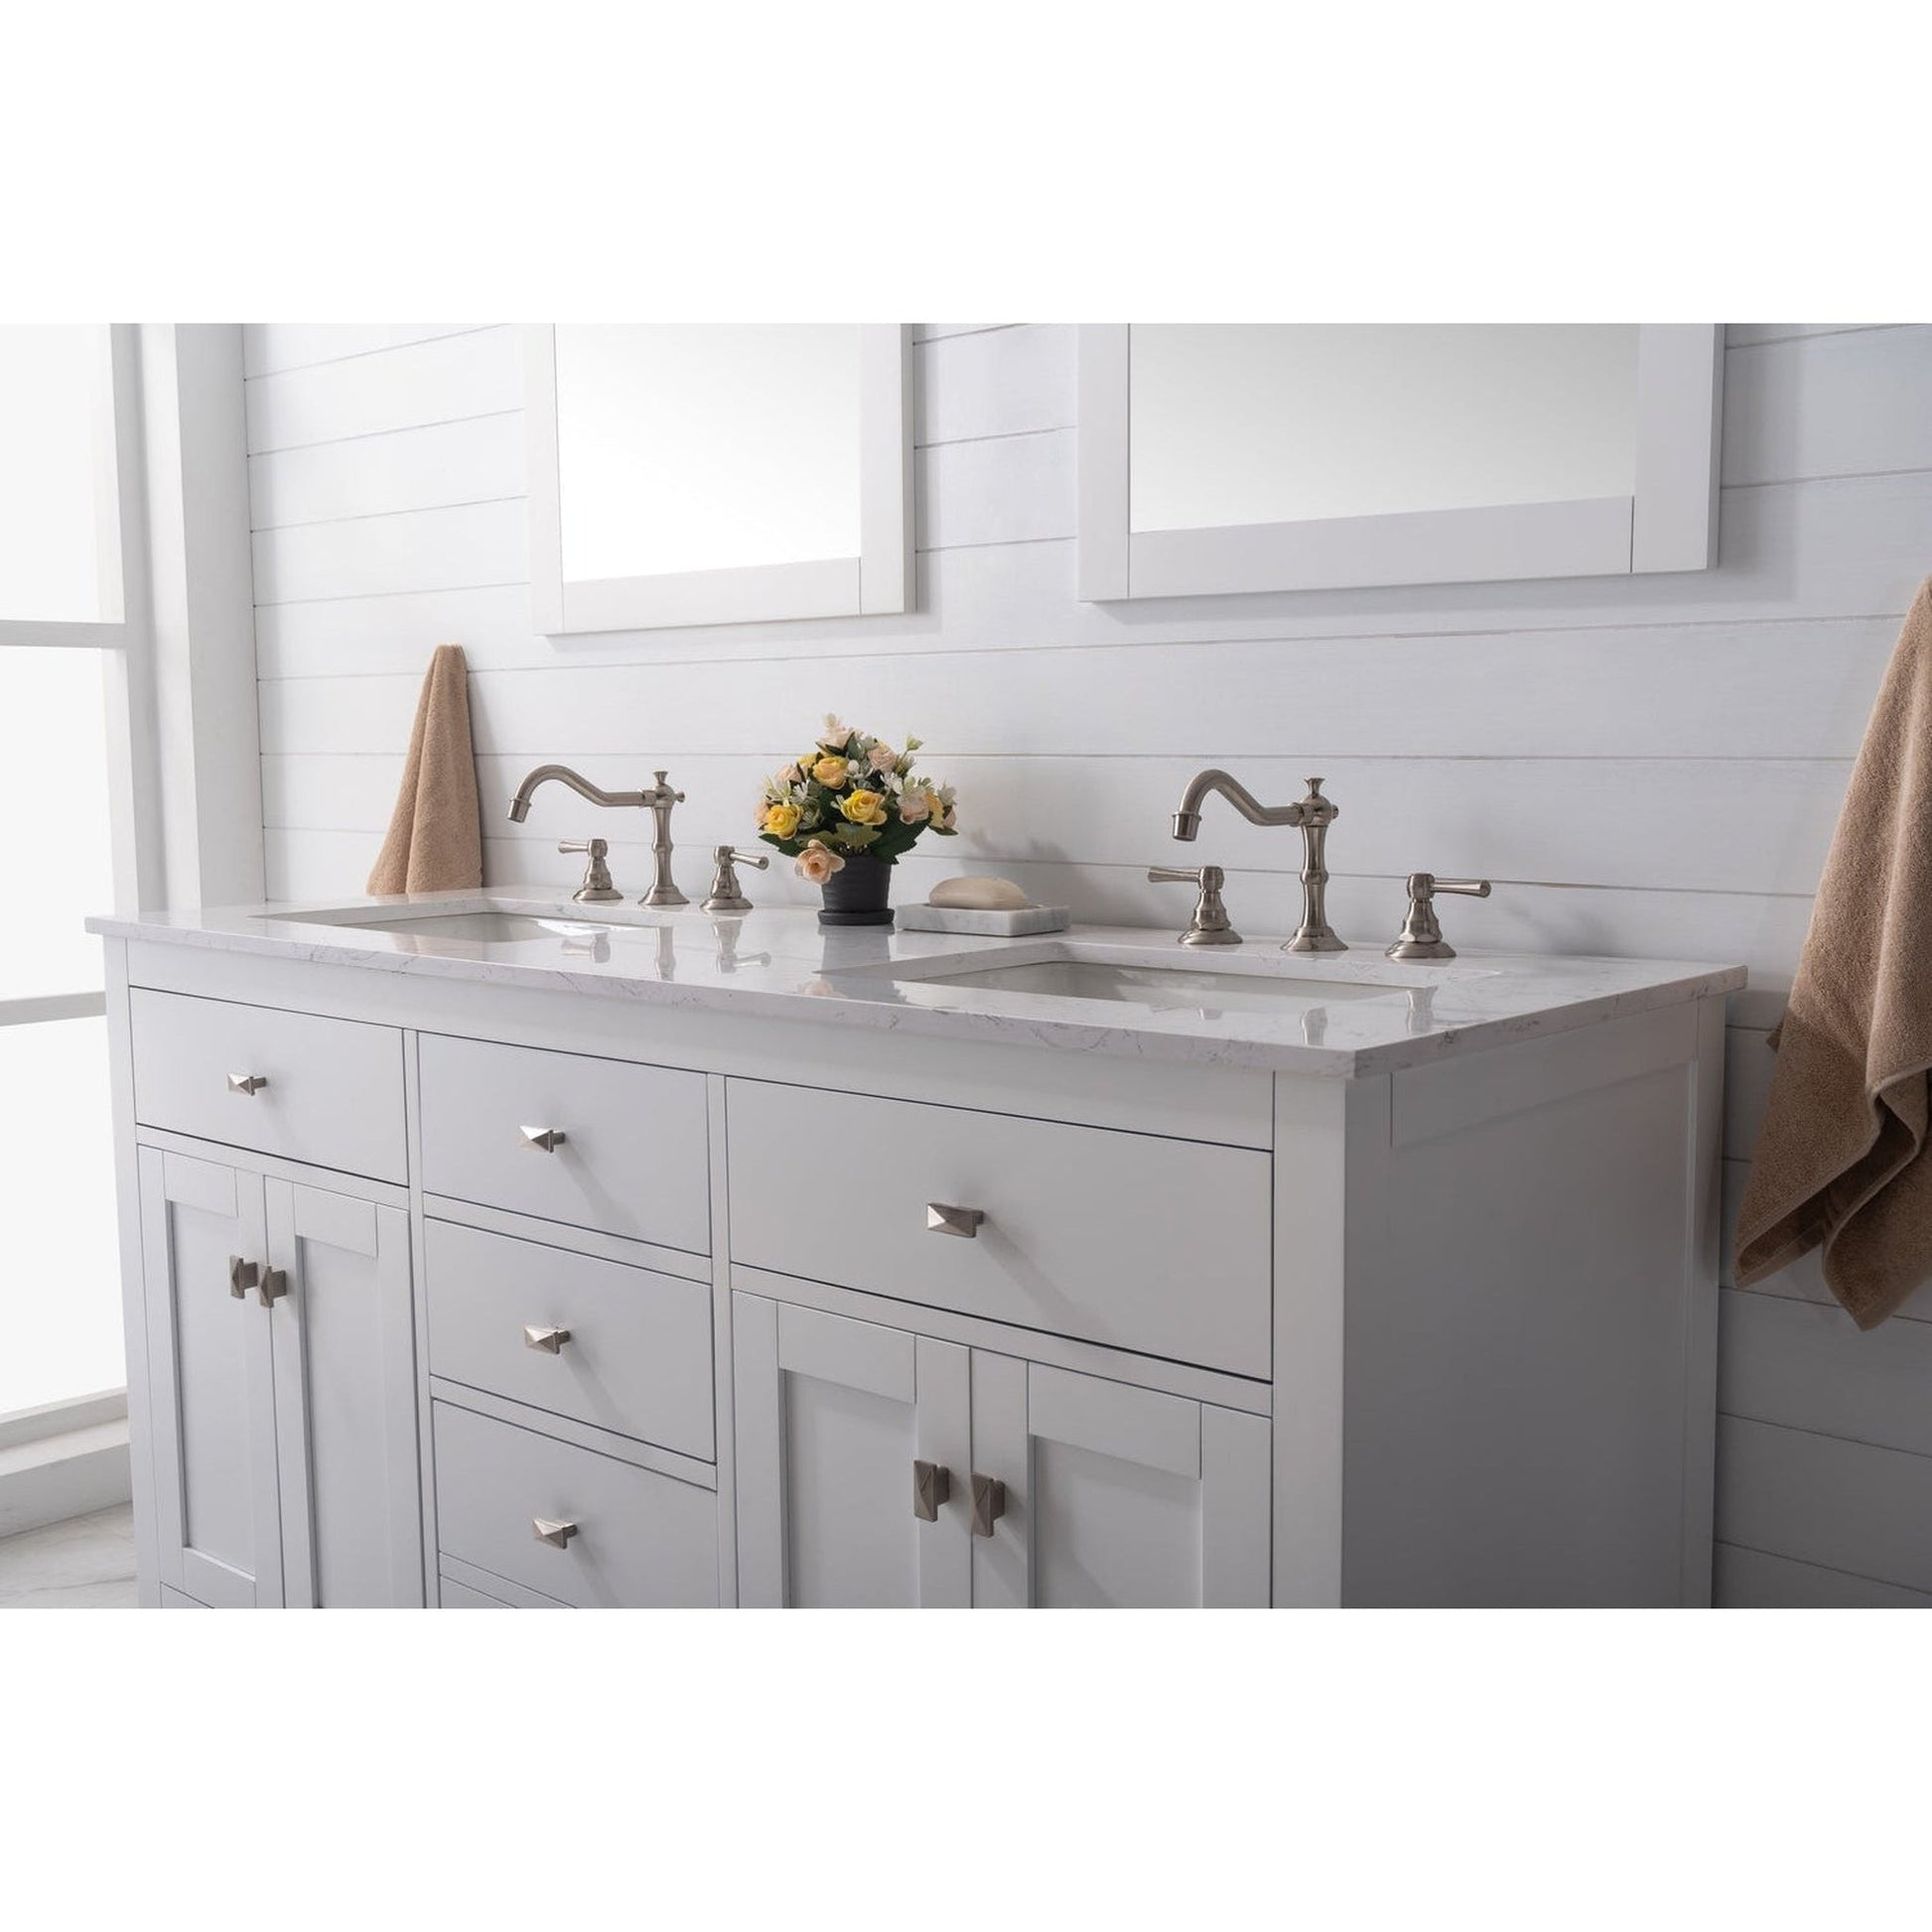 Eviva Totti Artemis 60" x 34" White Freestanding Bathroom Vanity With Carrara Style Man-made Stone Countertop and Double Undermount Sink